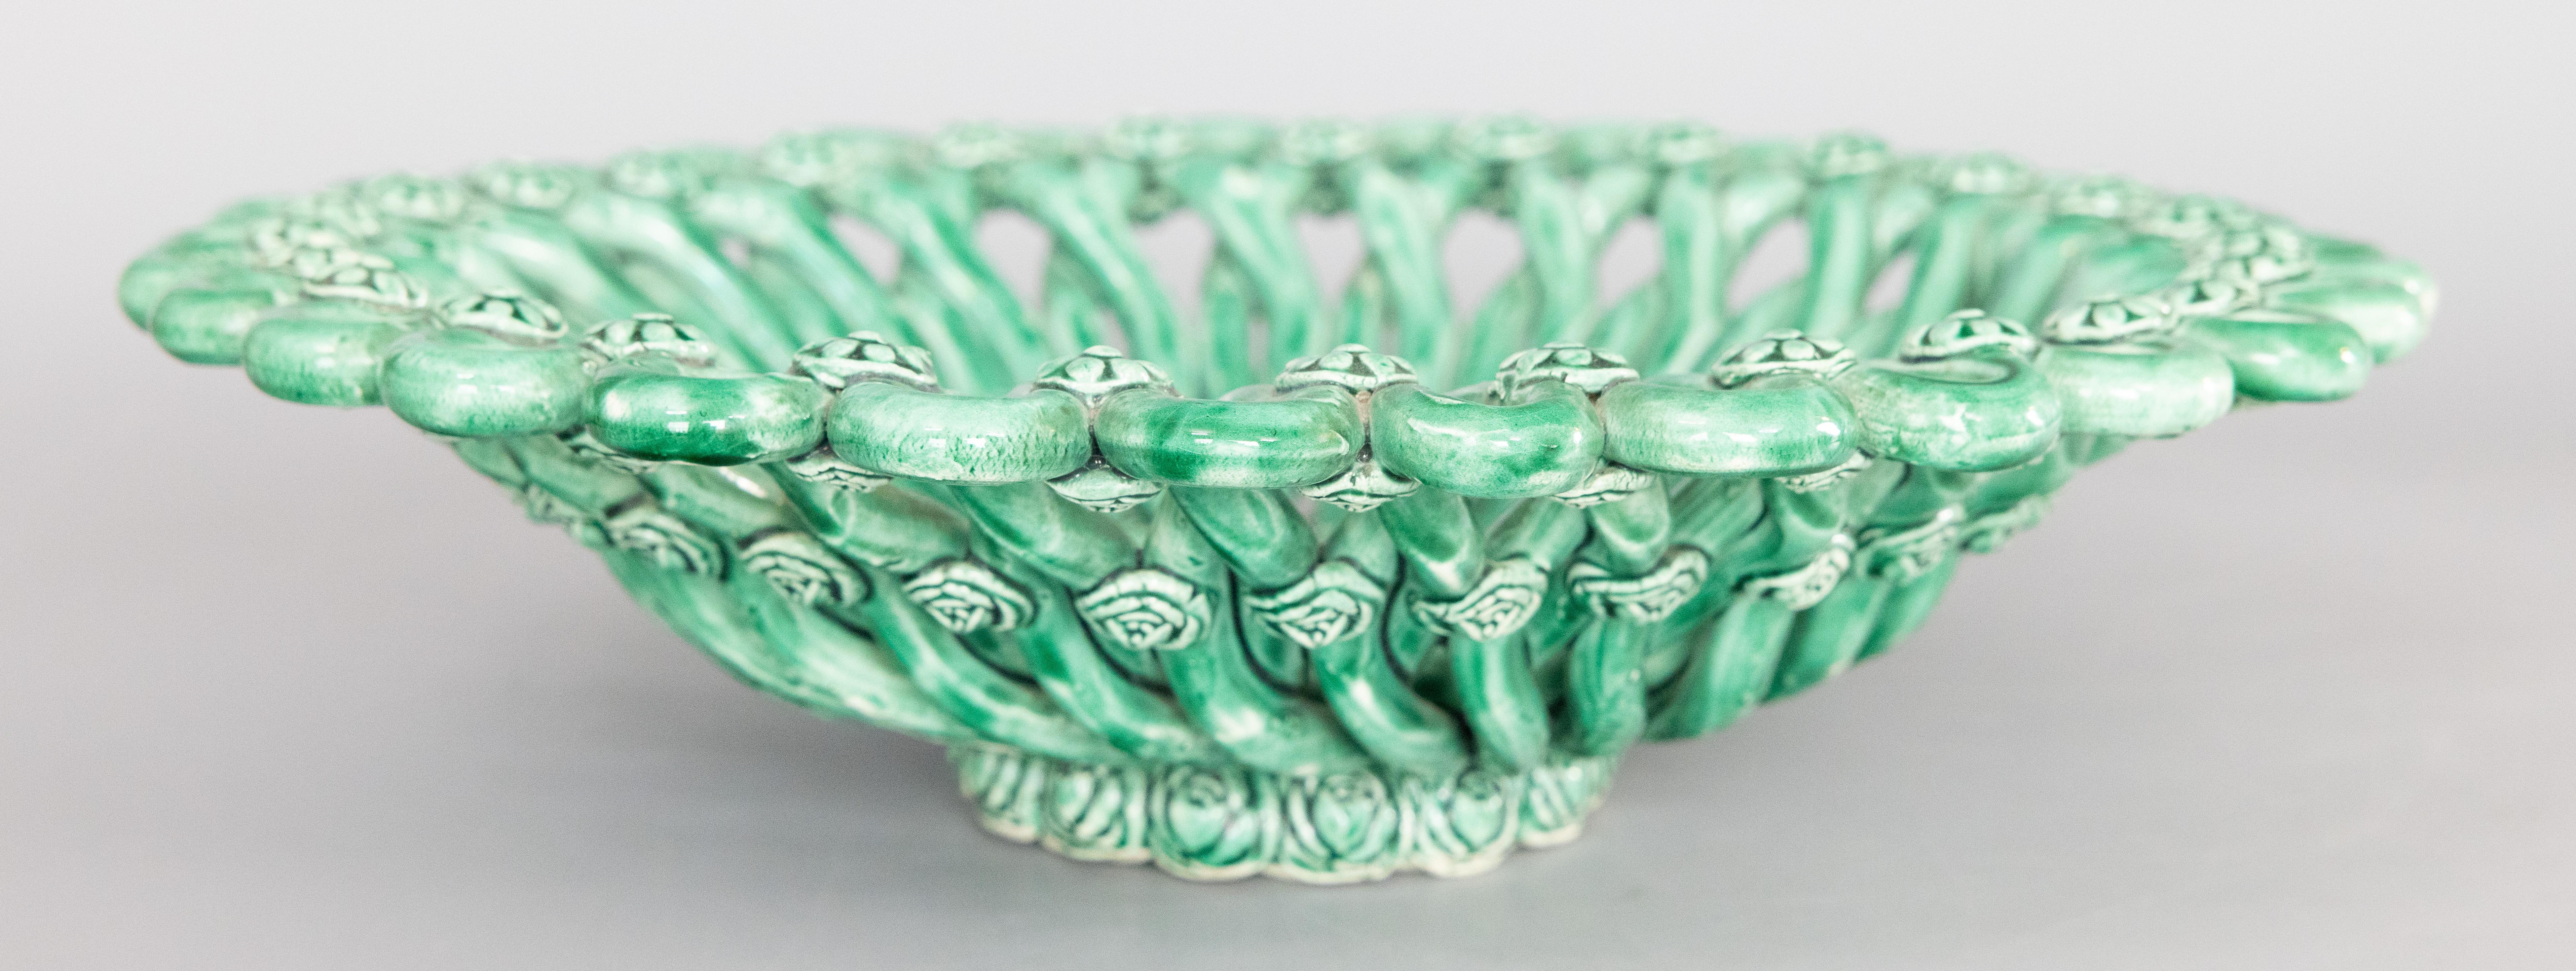 French Vallauris Majolica Emerald Green Reticulated Centerpiece Bowl, Circa 1940 For Sale 1